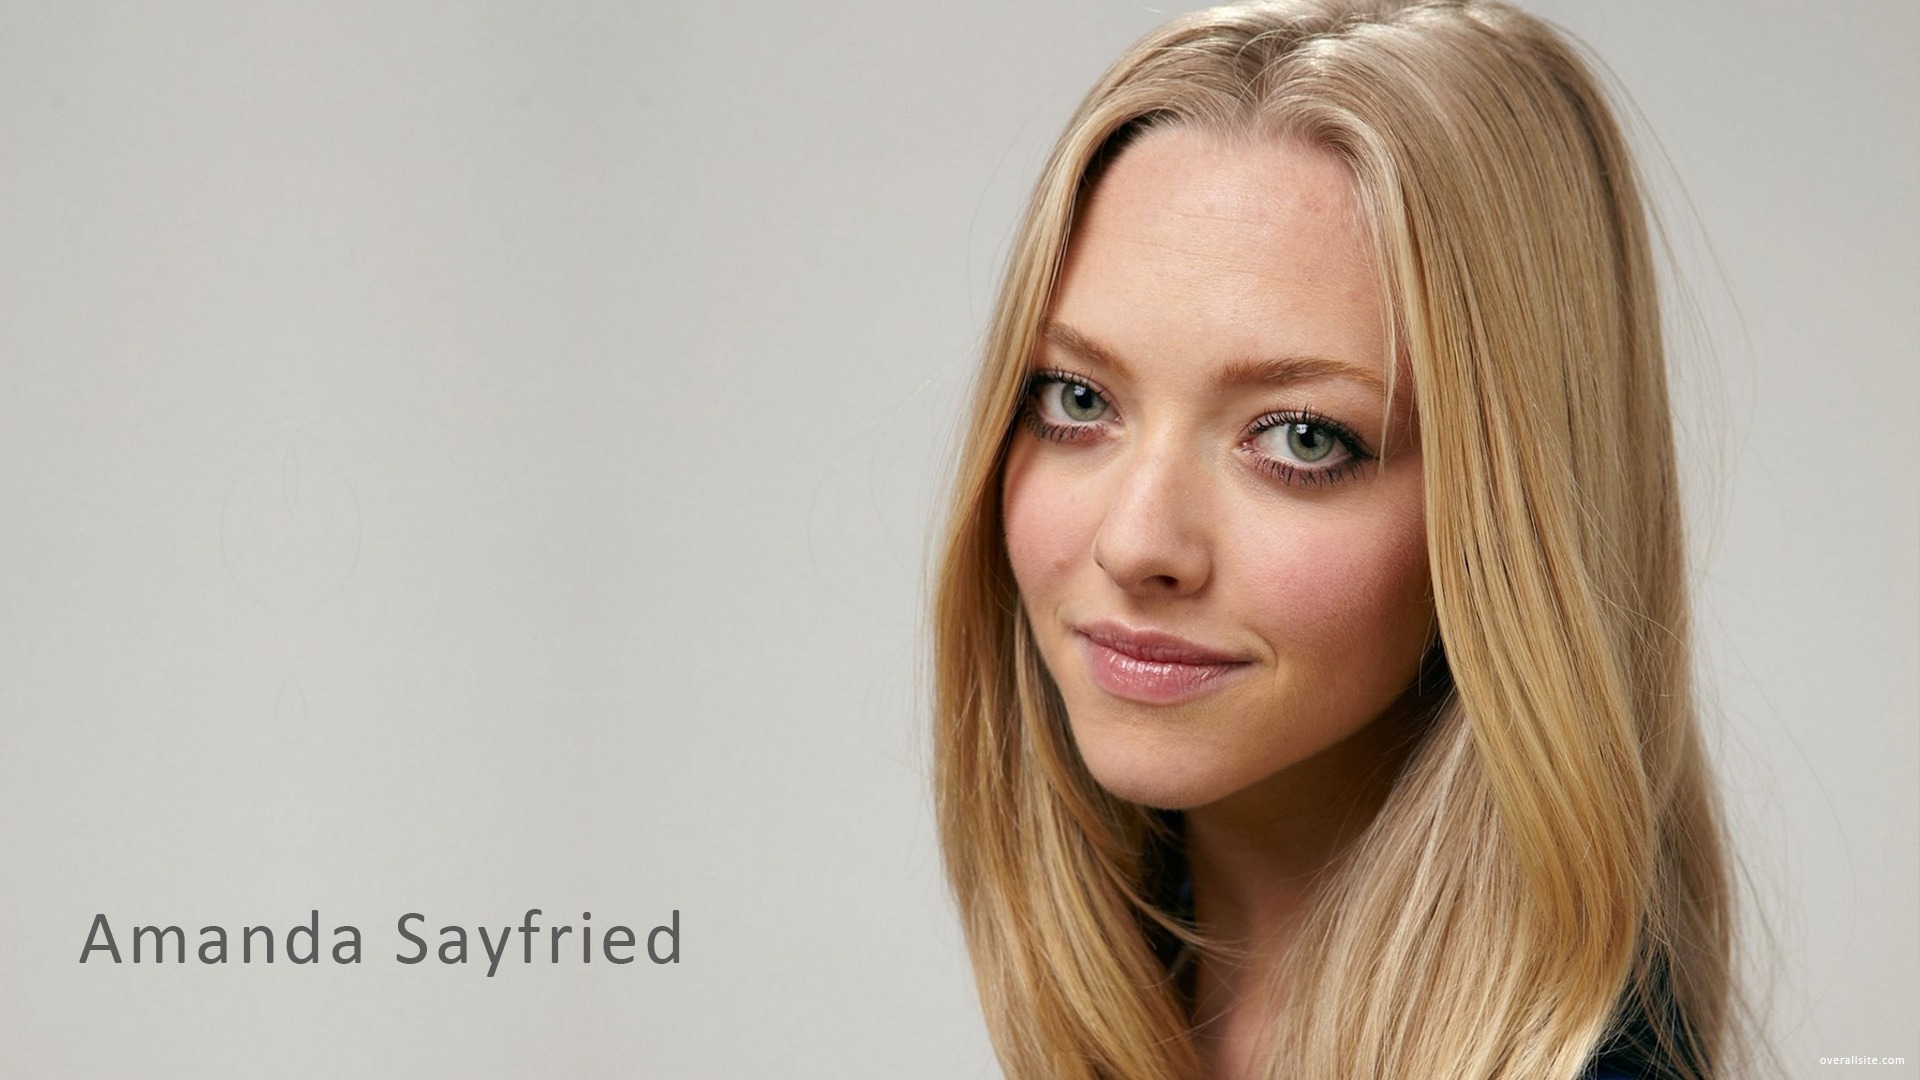 Amanda Seyfried #014 - 1920x1080 Wallpapers Pictures Photos Images